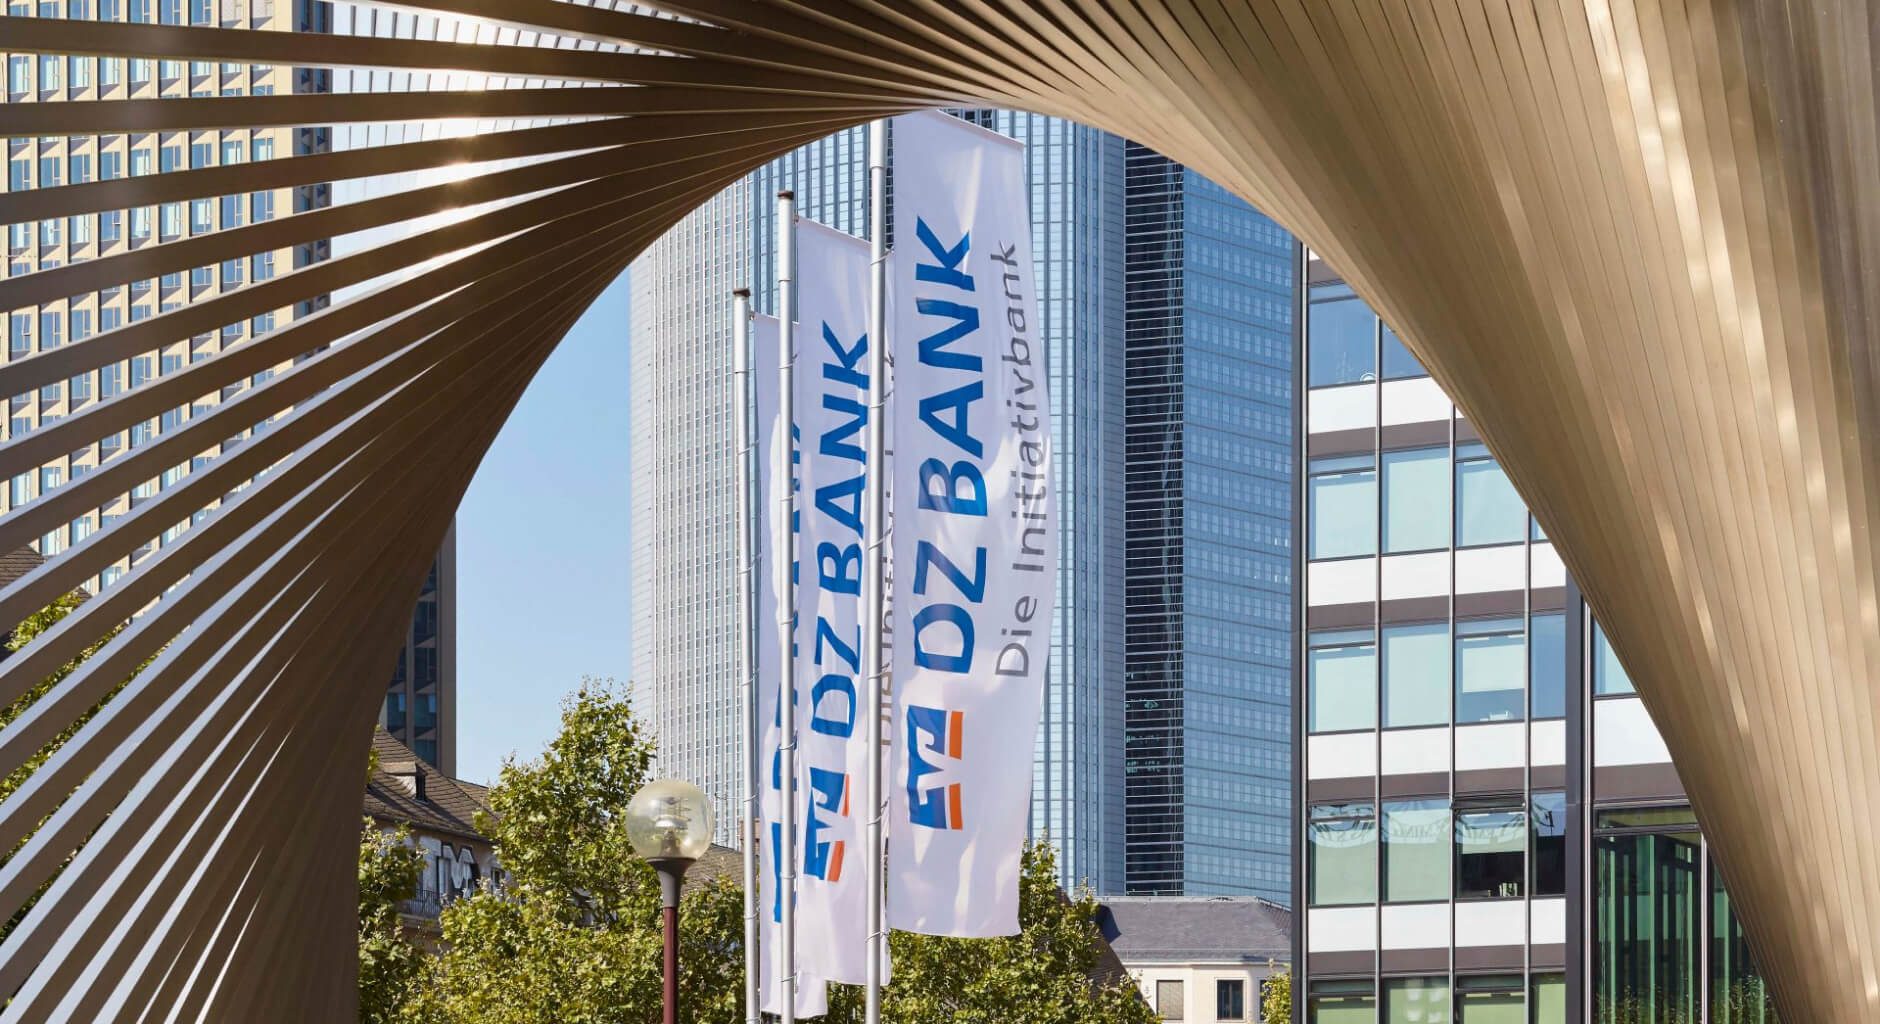 DZ BANK flags, as seen through the sculpture “Die Welt” (“The world”) in front of the DZ BANK Kunststiftung  and DZ Privatbank building in Frankfurt